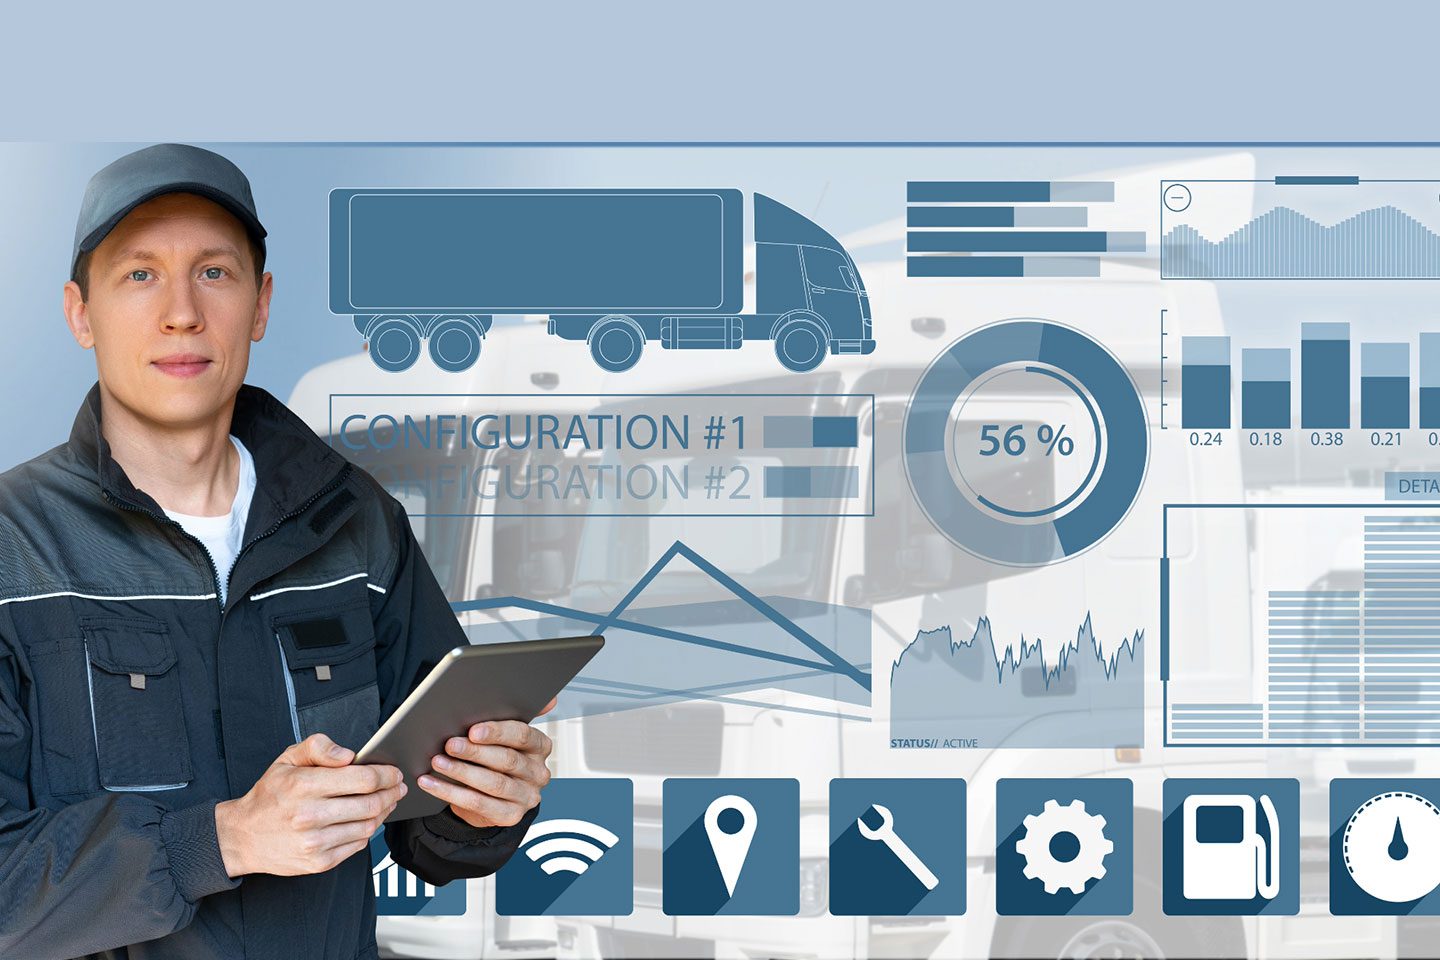 Many with tablet over graphics of fleet maintenance, vehicles, and infographic icons.